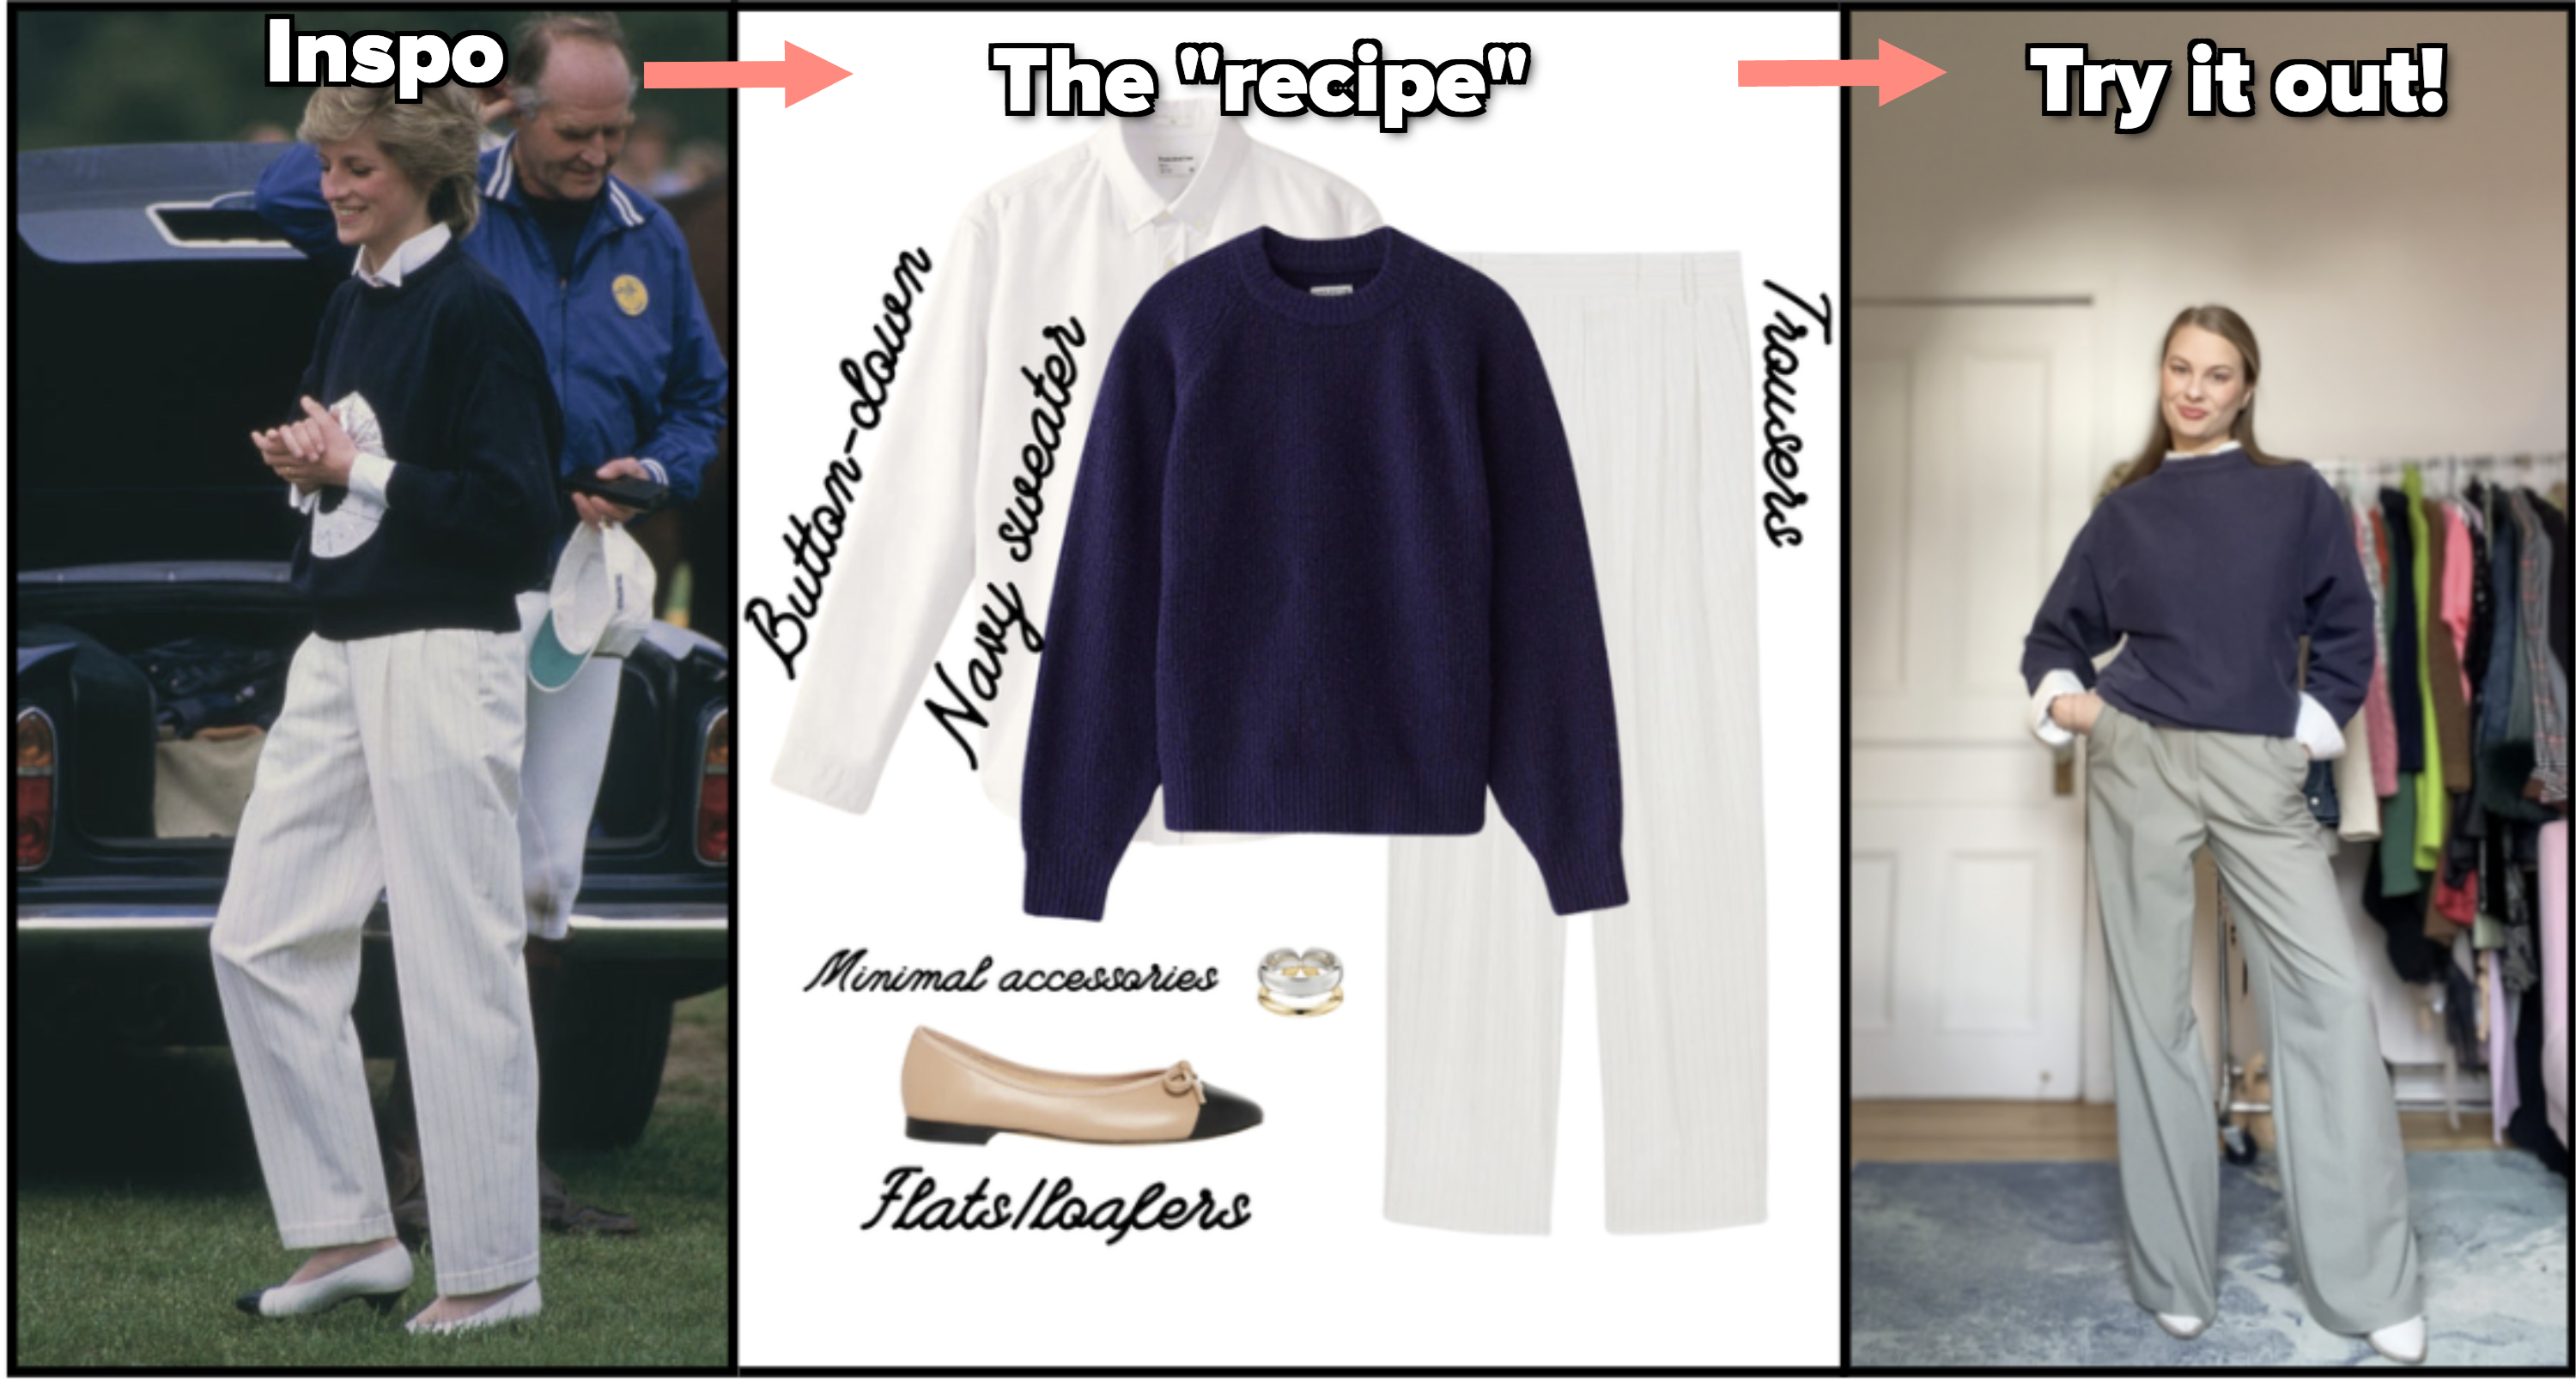 Diana&#x27;s outfit, my cheat sheet recipe, and me trying the outfit out